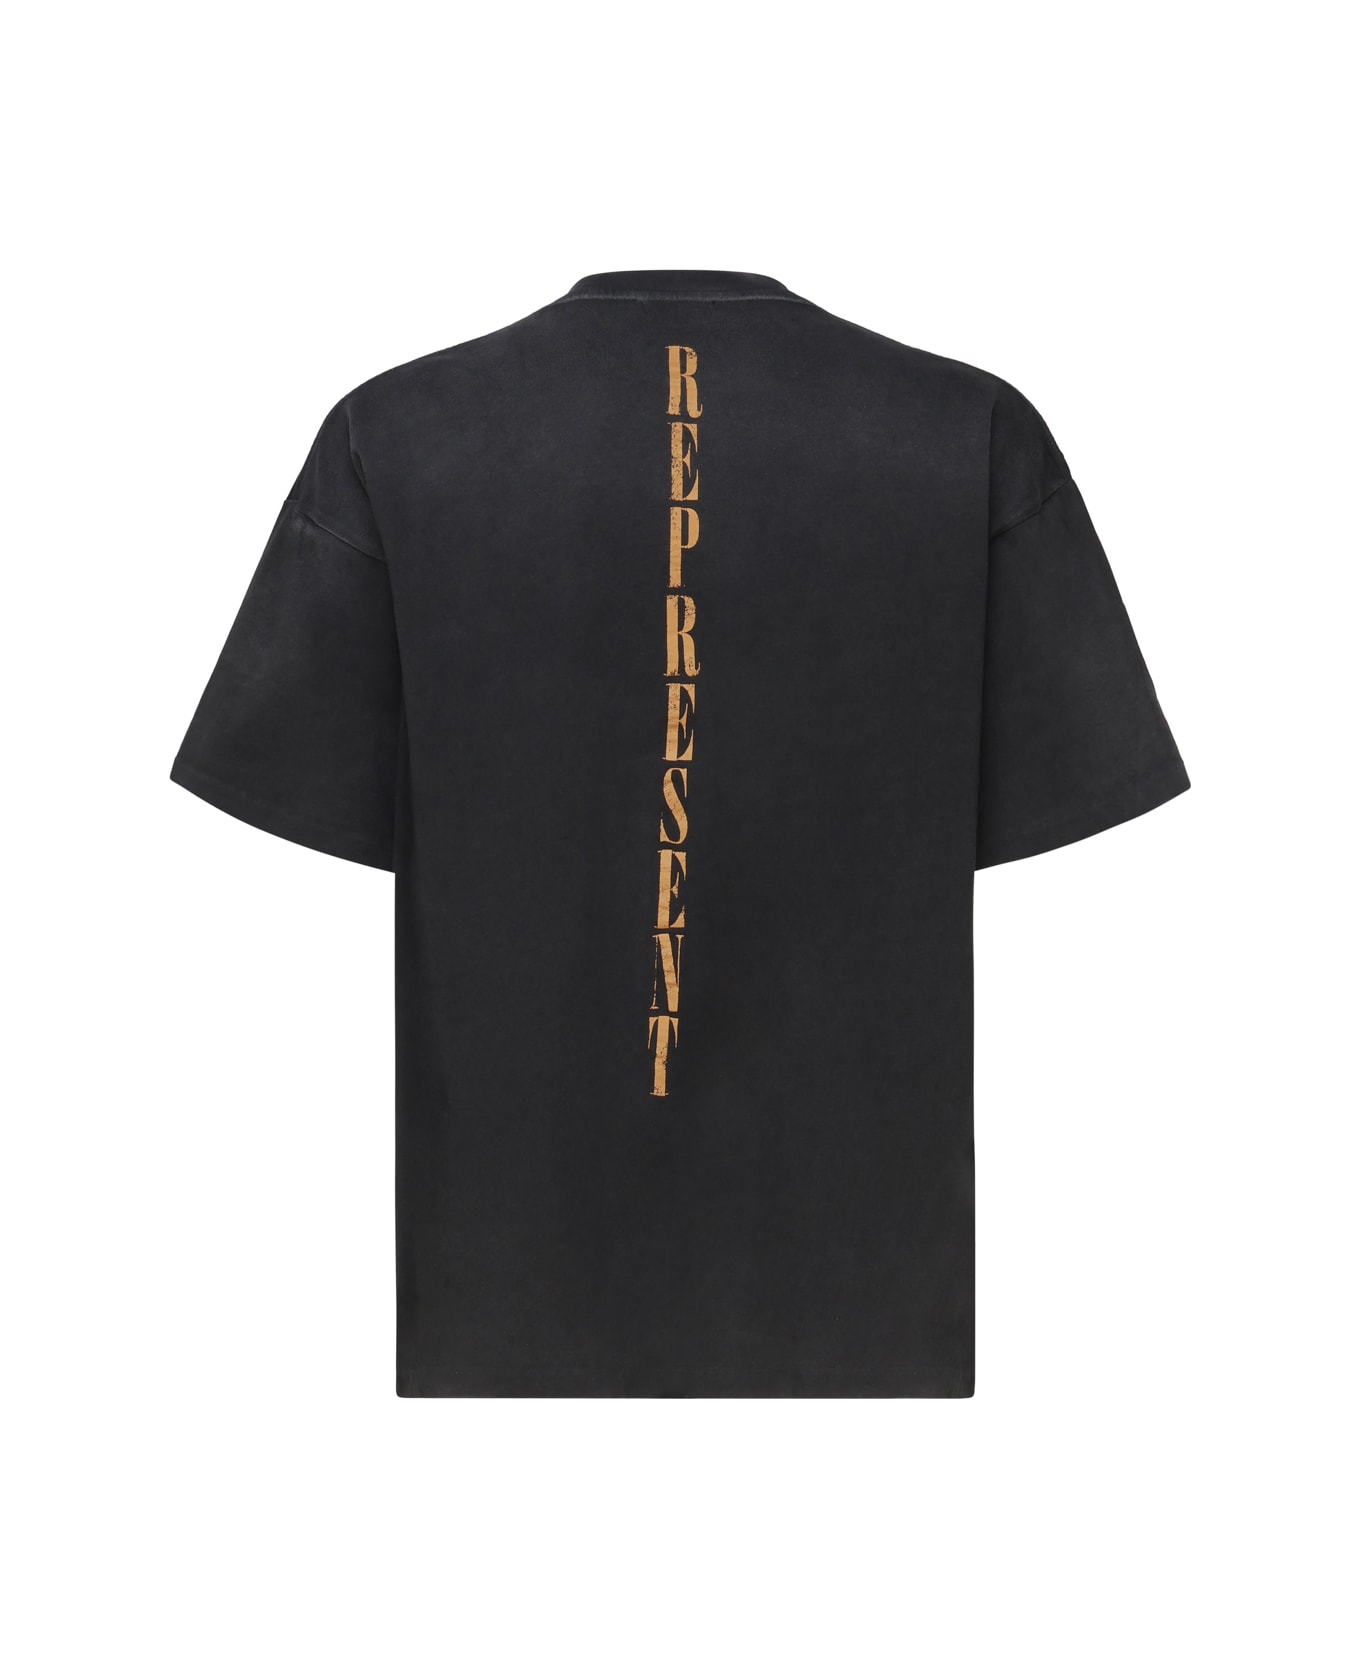 REPRESENT Cotton T-shirt With Print - Aged black